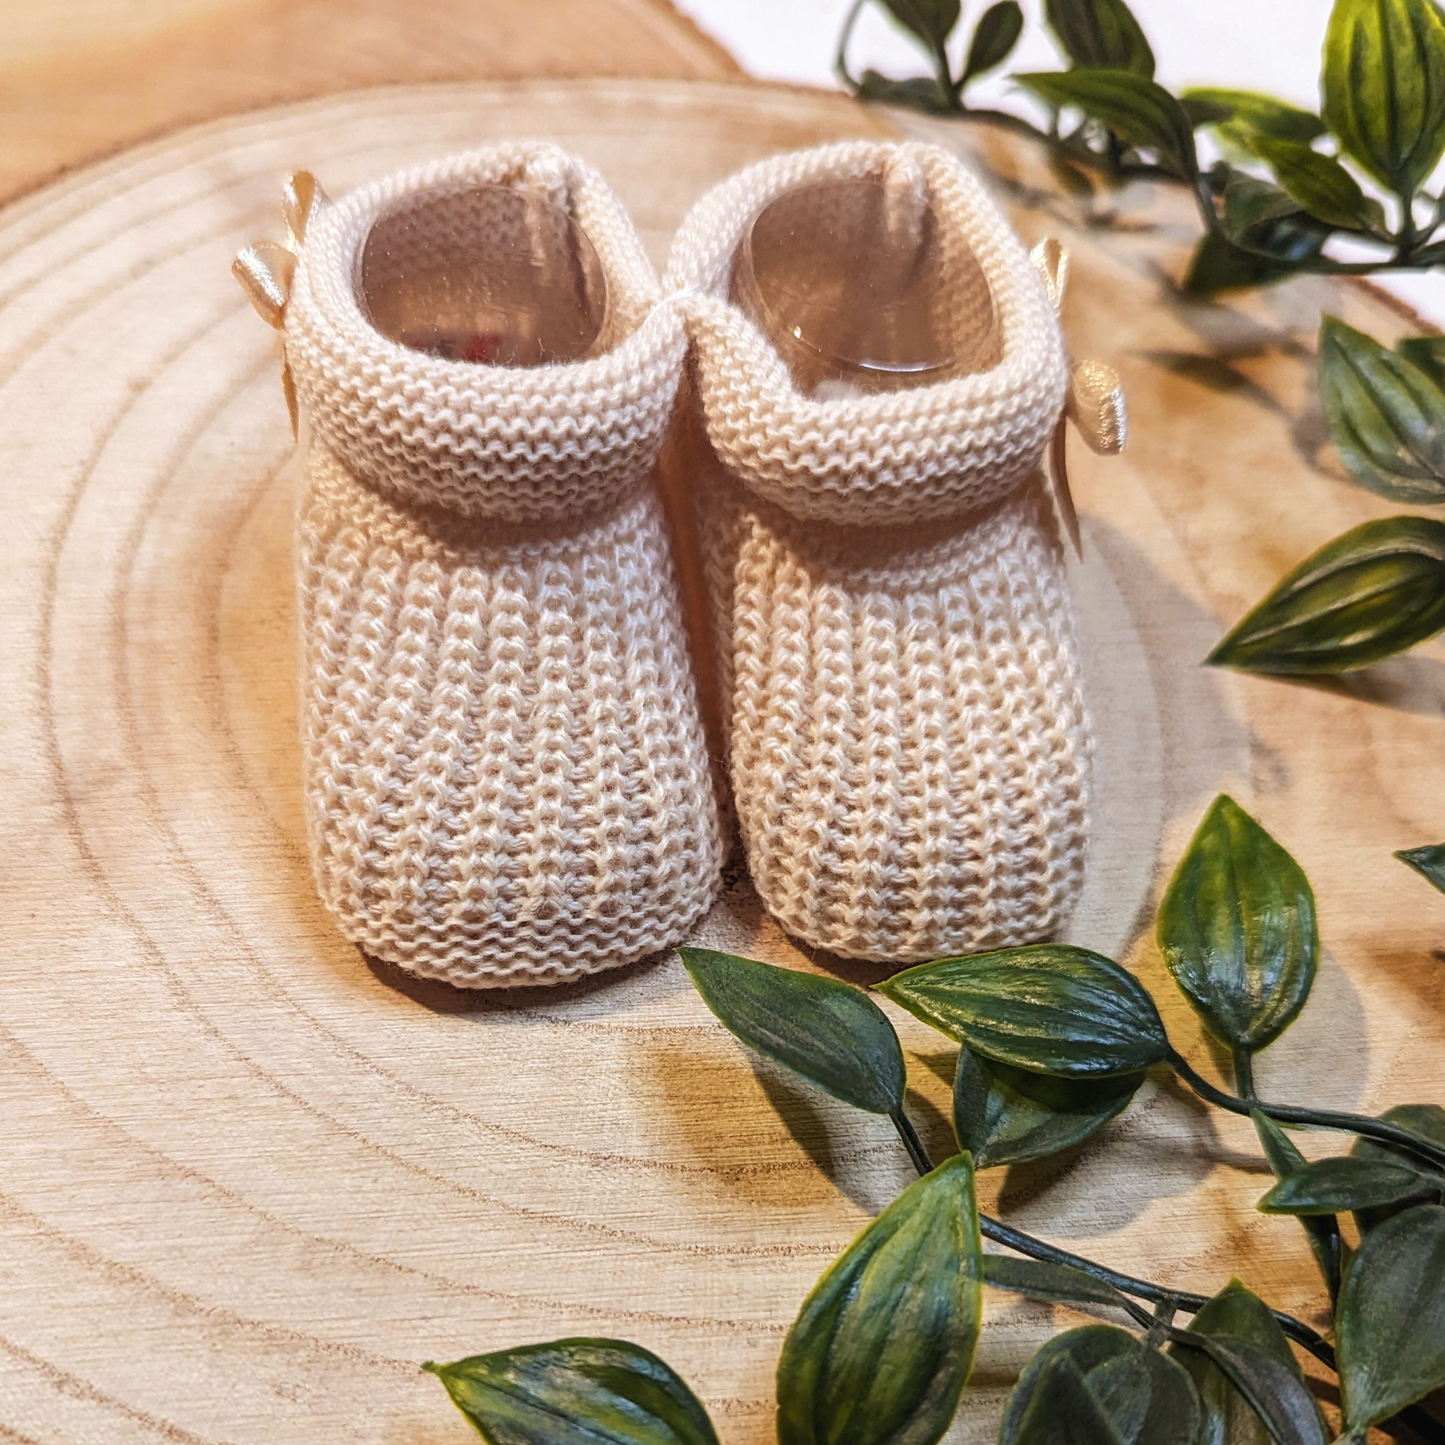 Unisex Newborn Clothes - Baby booties with a biscuit coloured knitted design, featuring a small bow on the side. (Top Angle)